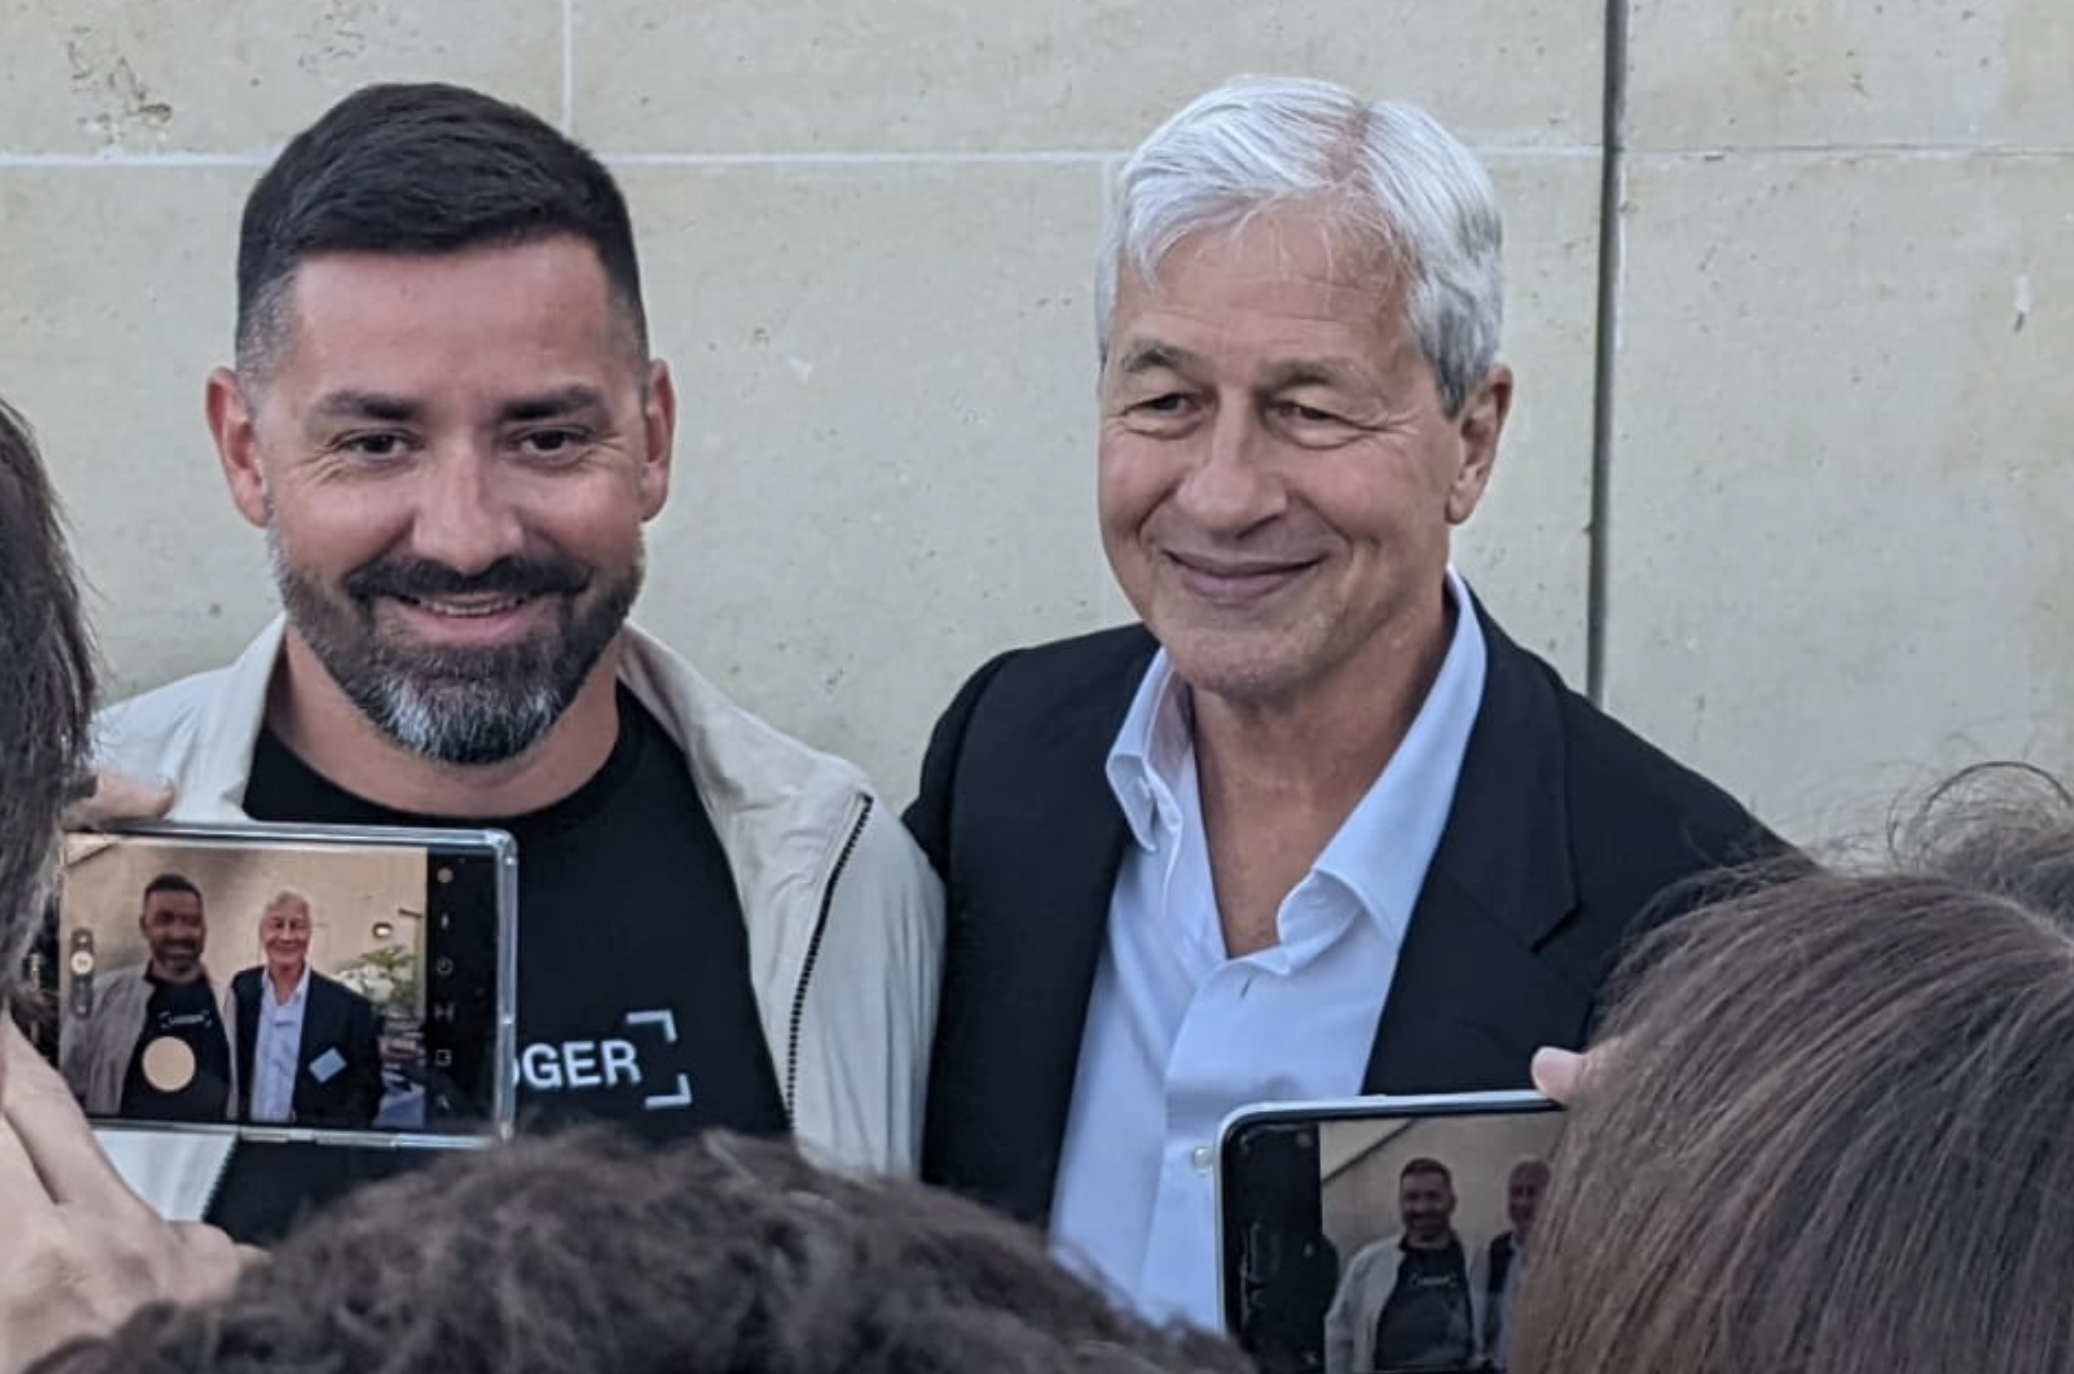 Ledger CEO and Jamie Dimon, May 2022